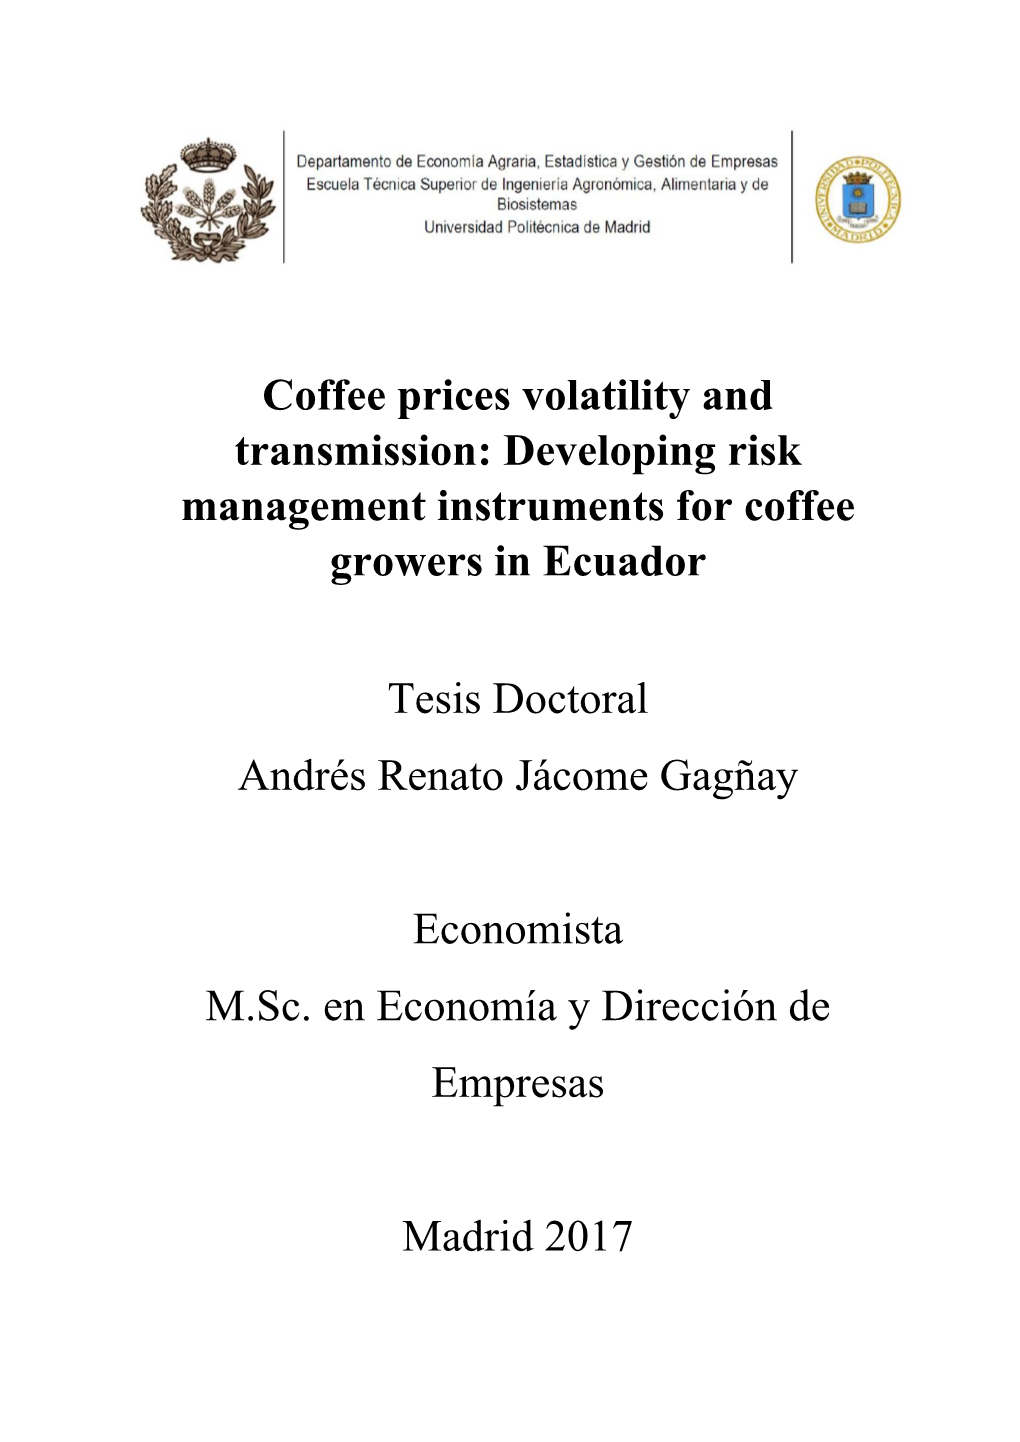 Developing Risk Management Instruments for Coffee Growers in Ecuador